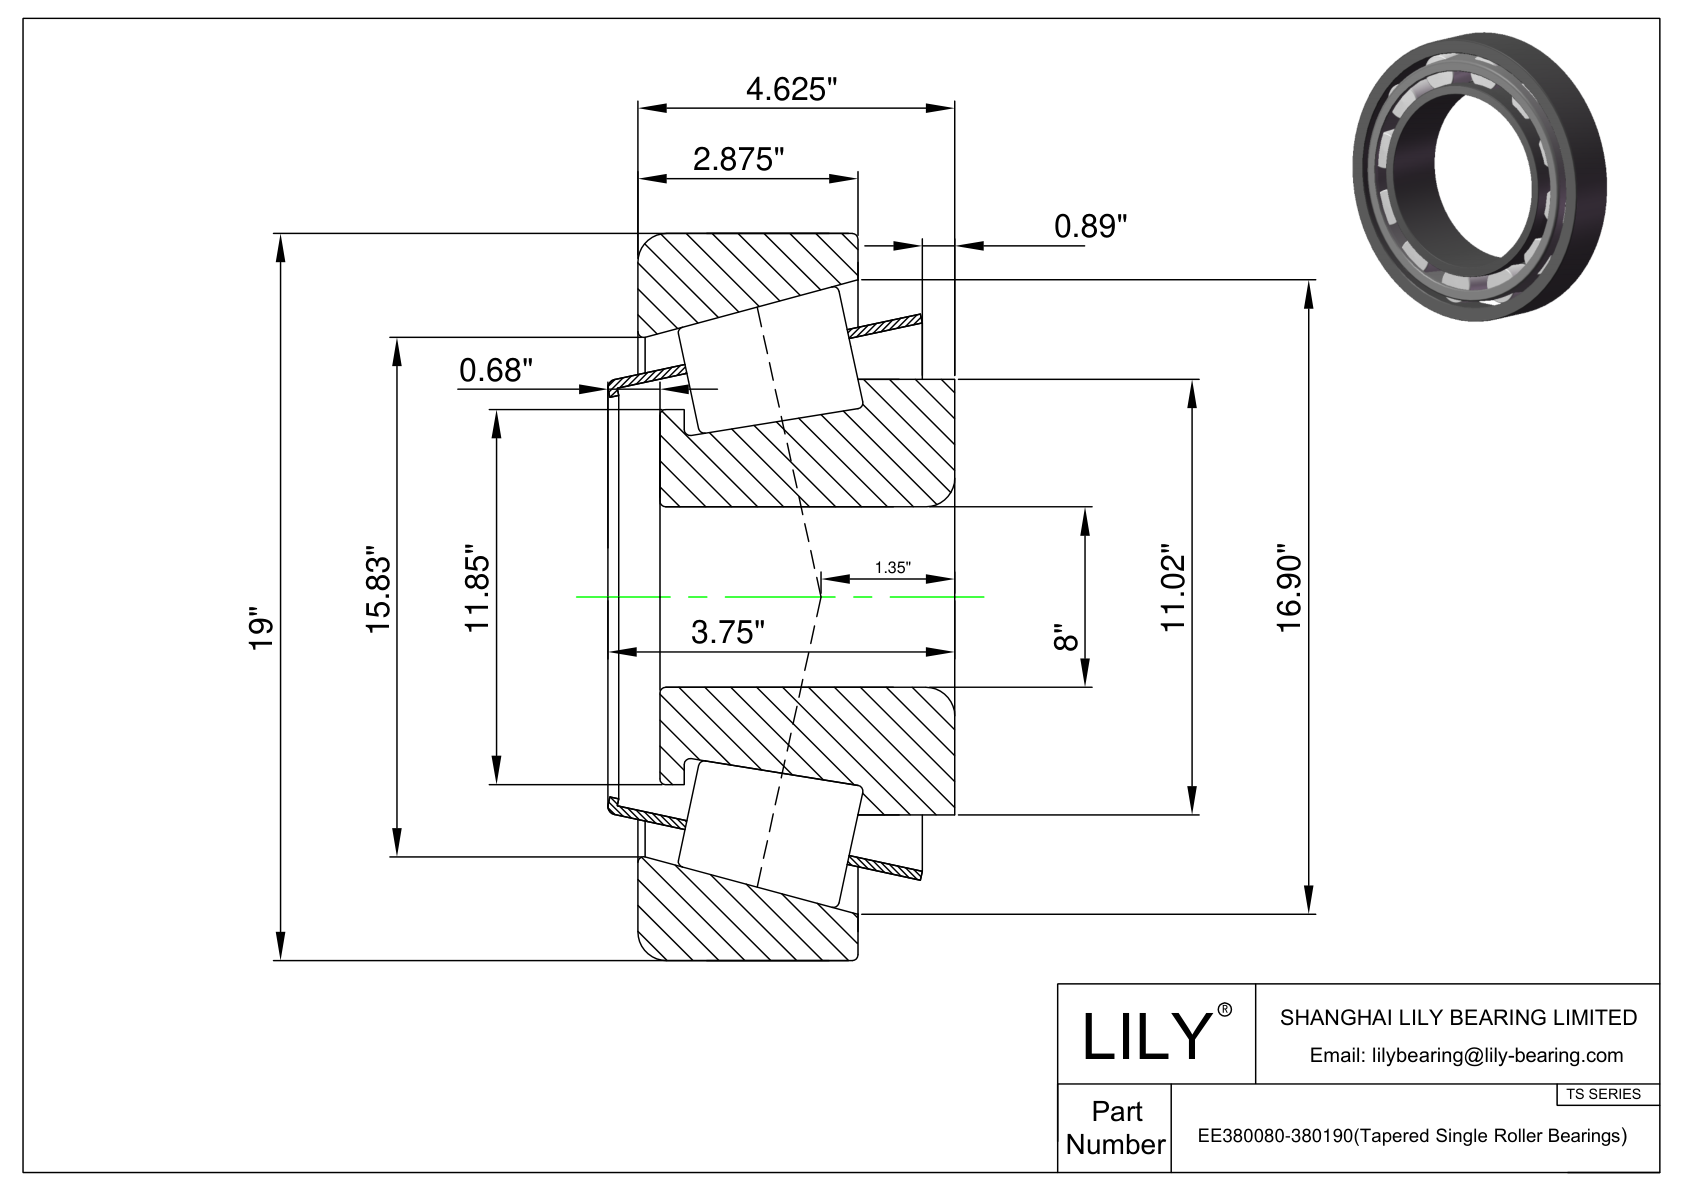 EE380080-380190 TS (Tapered Single Roller Bearings) (Imperial) cad drawing